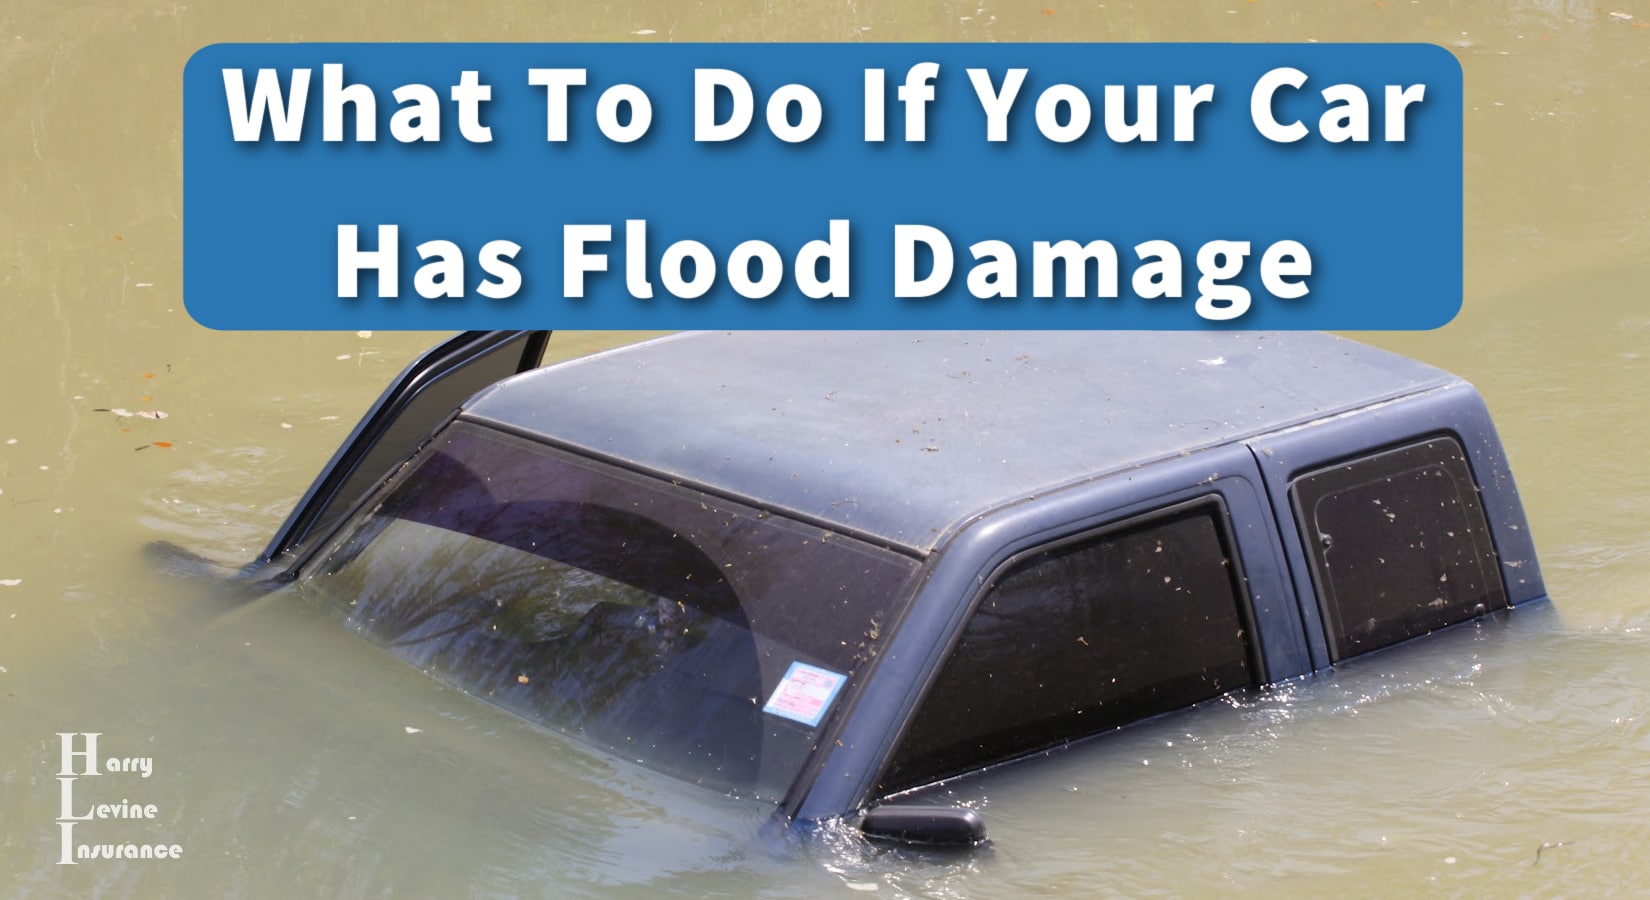 What To Do If Your Car Has Flood Damage - Harry Levine Insurance